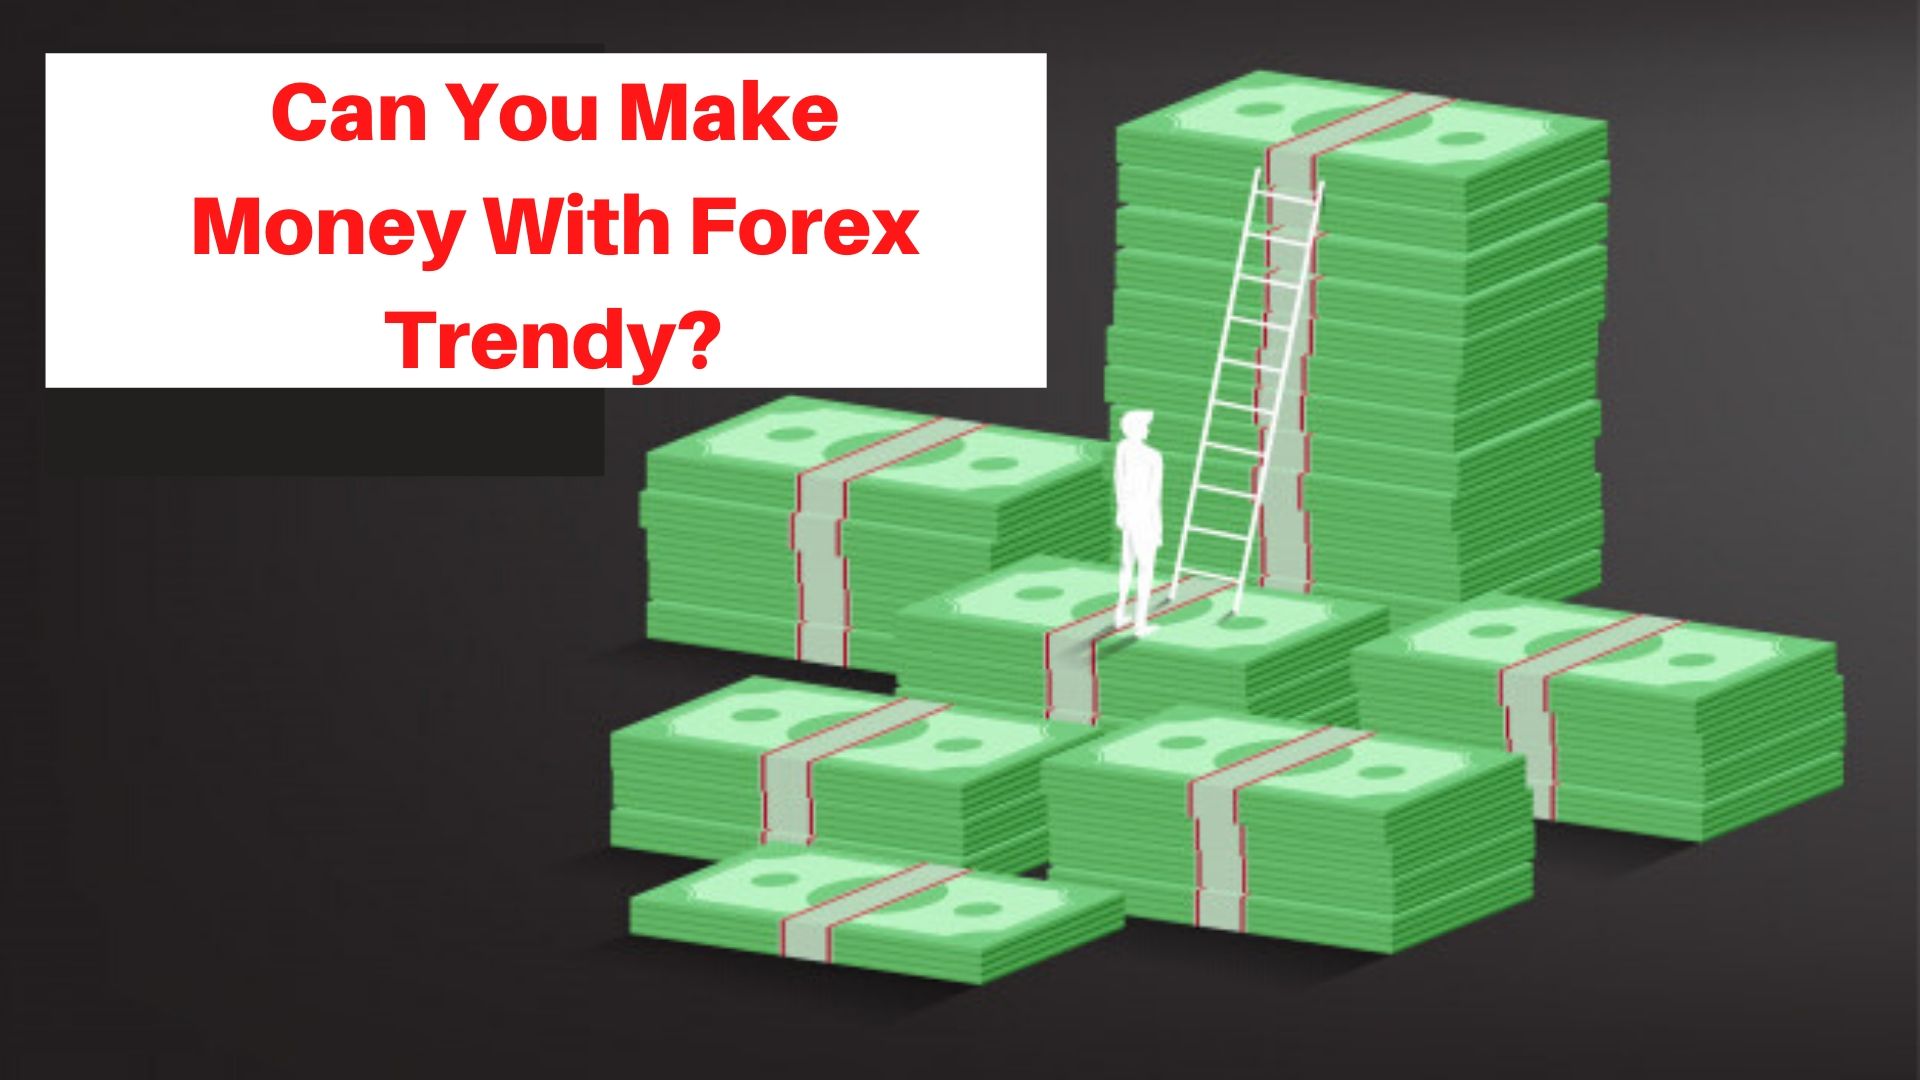 appldesigns: Can You Make Money Trading Forex